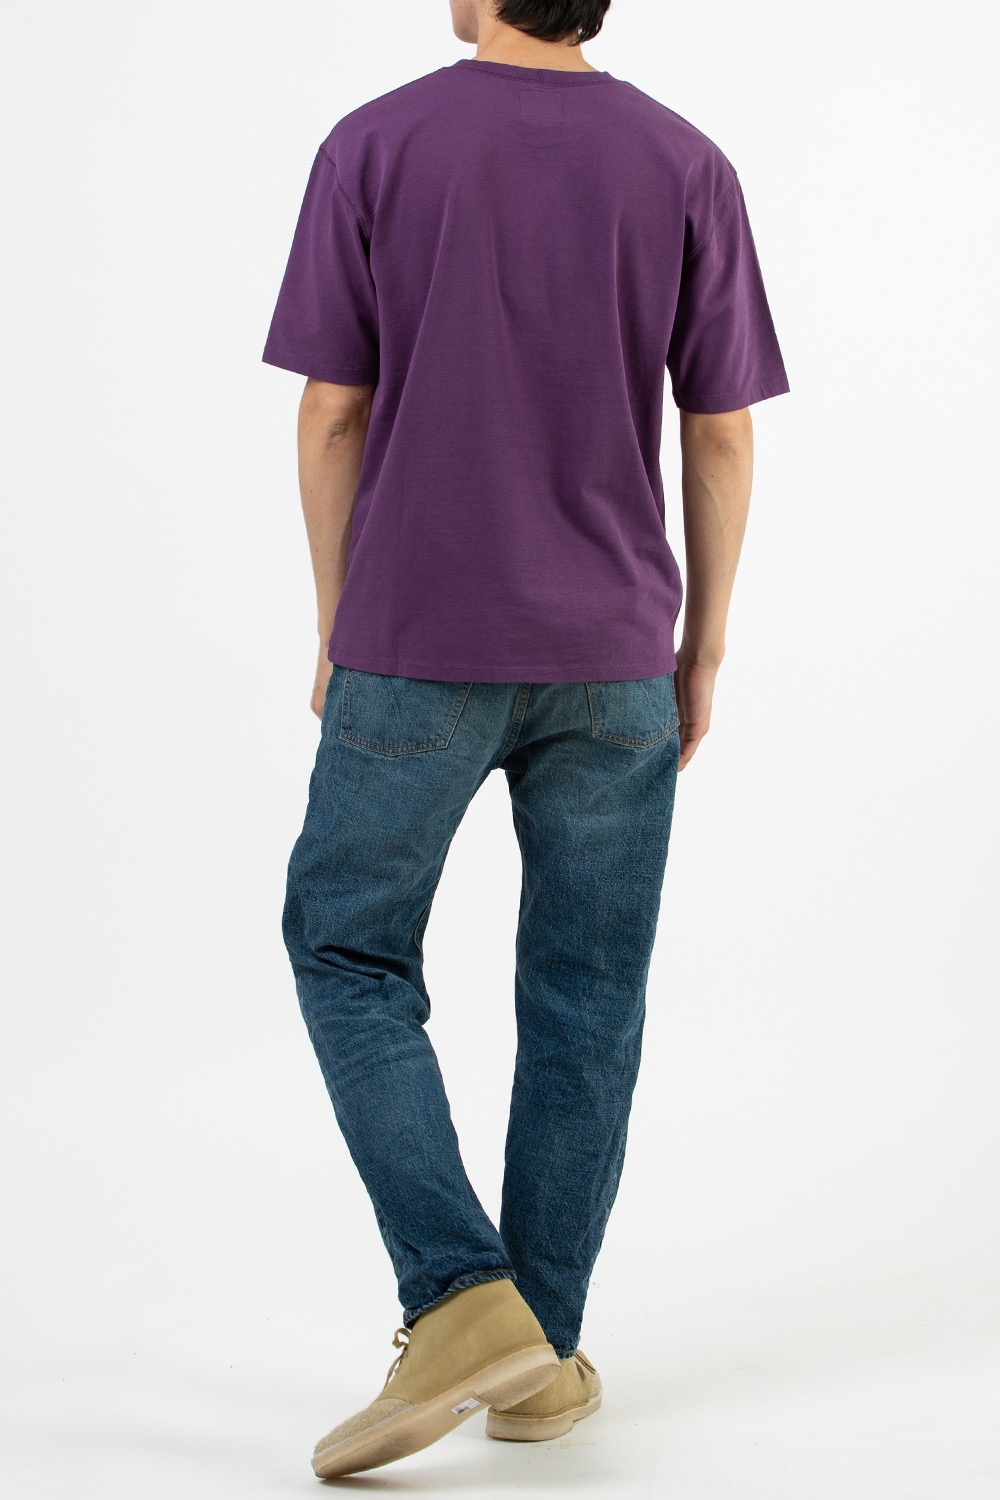 (CARRY OVER)SOLID CREW NECK HIKING TEE PURPLE